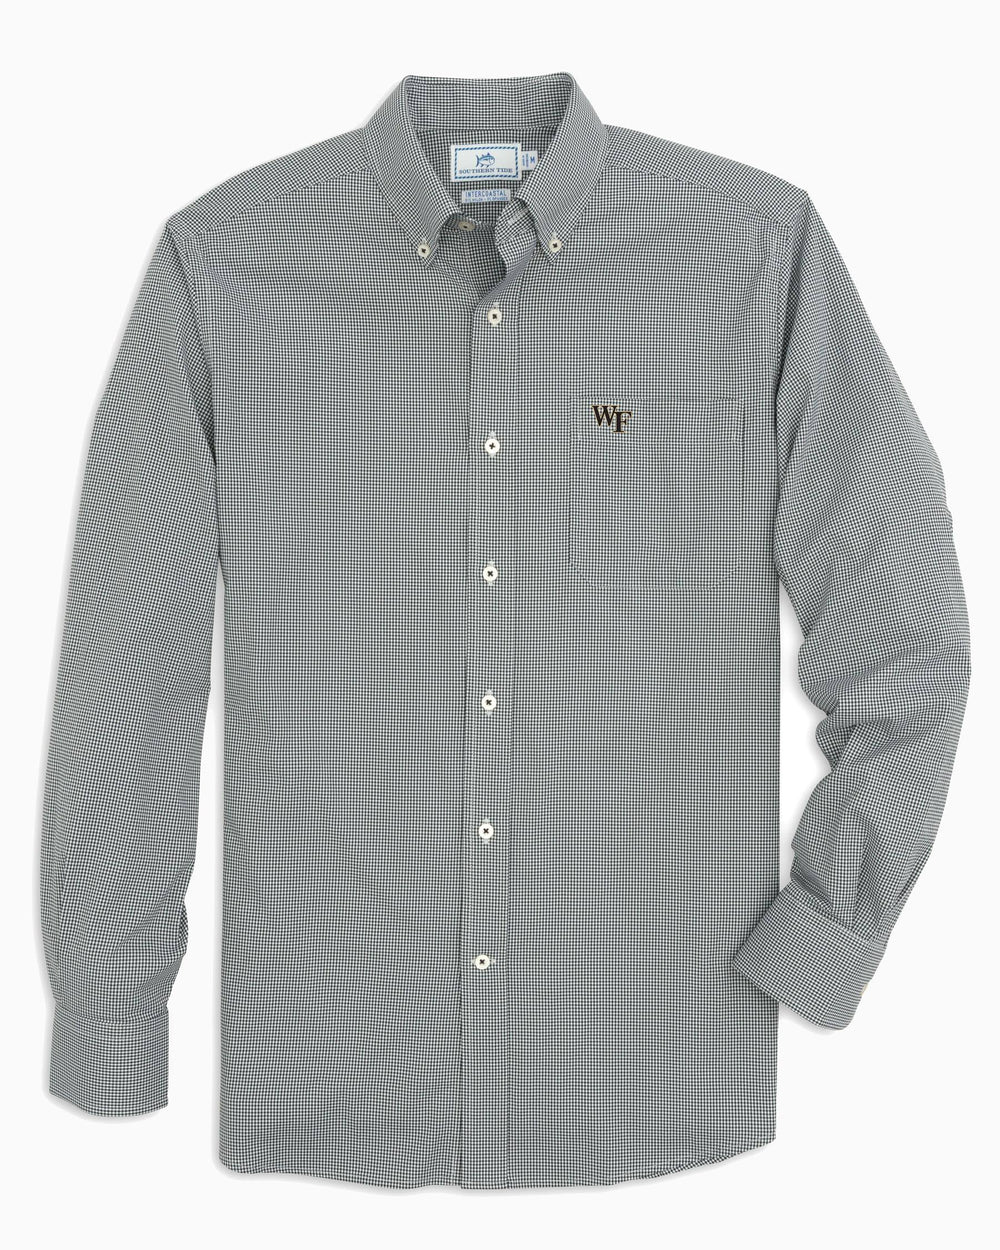 The front view of the Men's Black Wake Forest Gingham Button Down Shirt by Southern Tide - Black